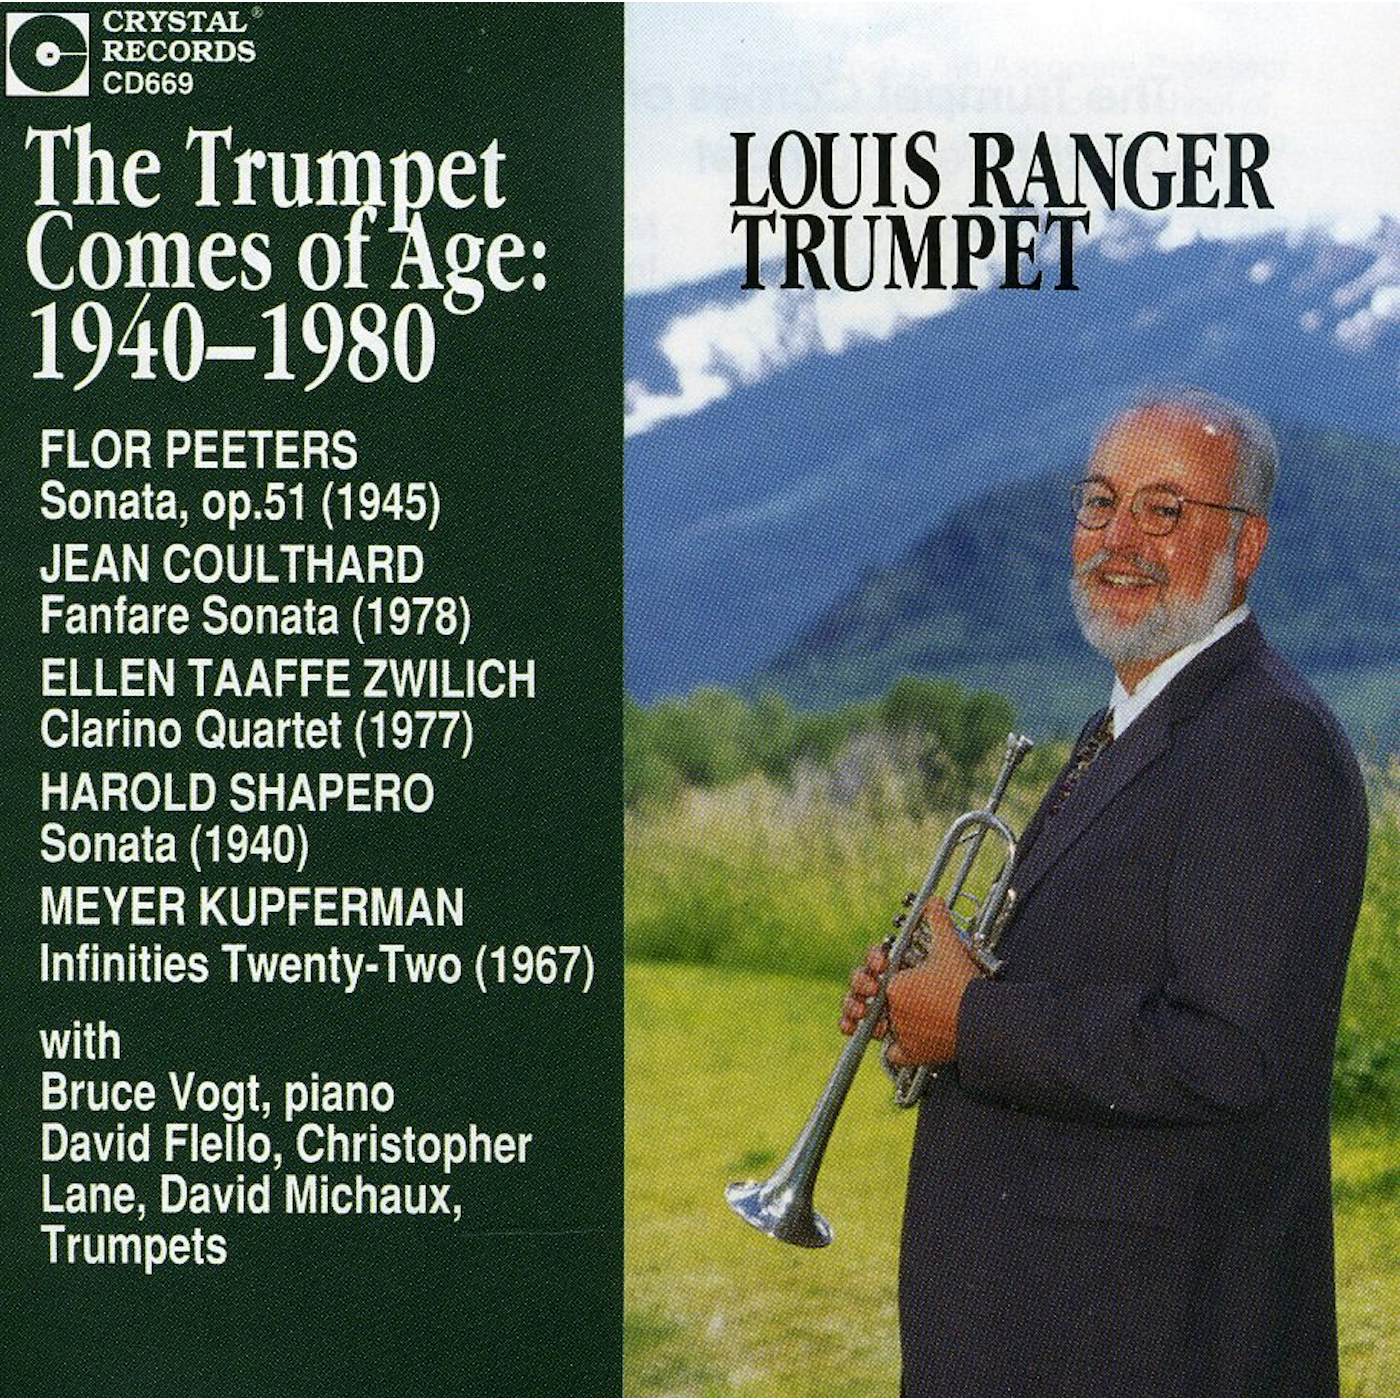 Ranger TRUMPET COMES OF AGE CD